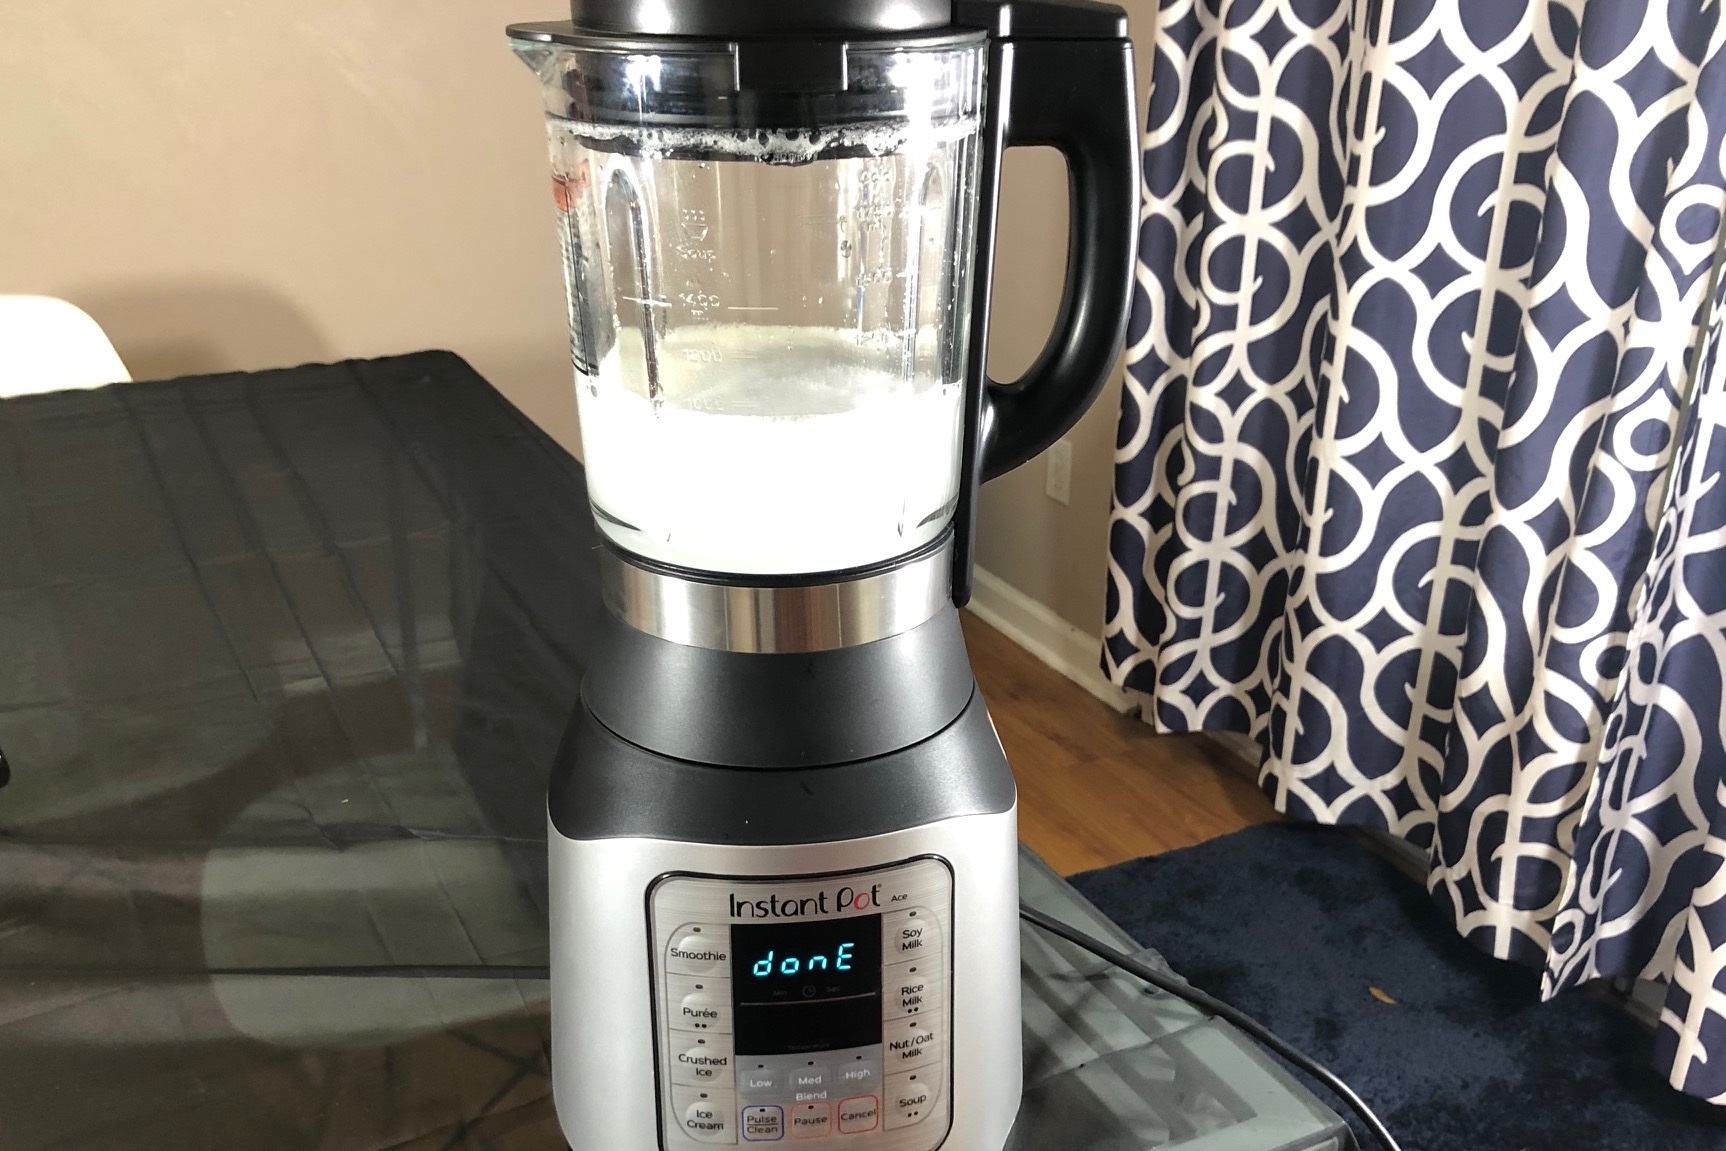 The Instant Pot Ace Blender Is Your Cooking Ace